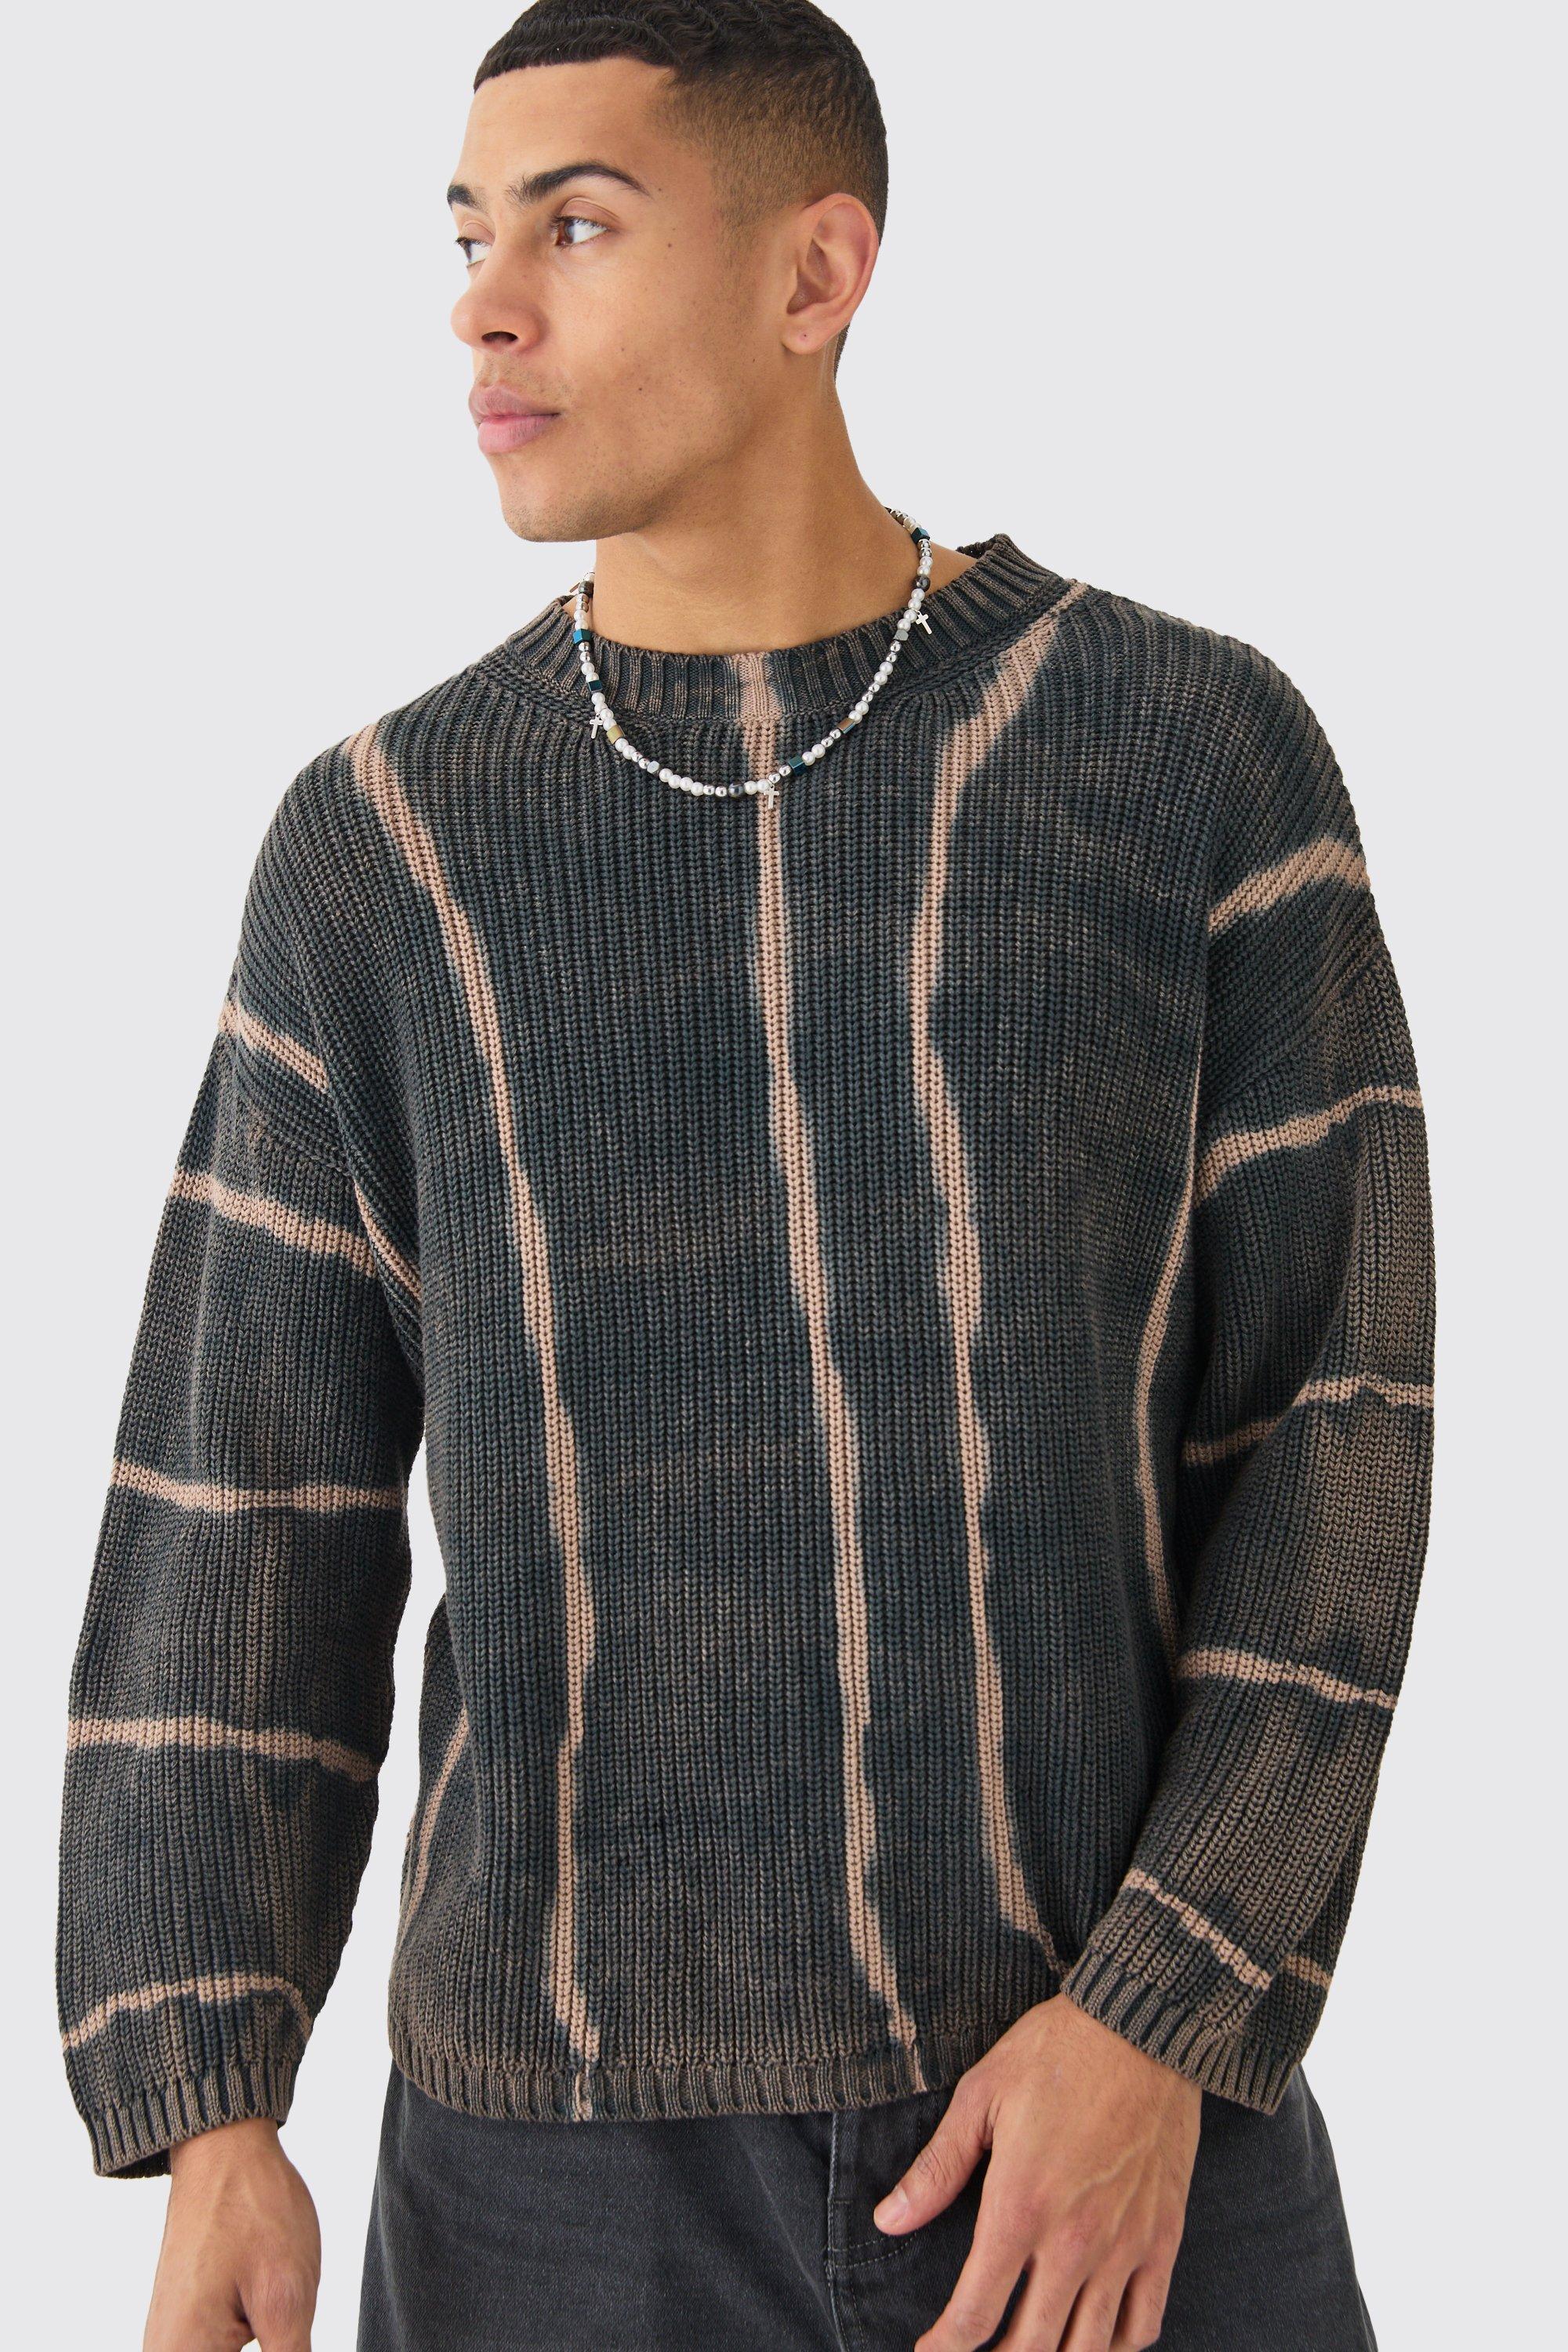 Image of Oversized Boxy Stone Wash Jumper In Charcoal, Grigio